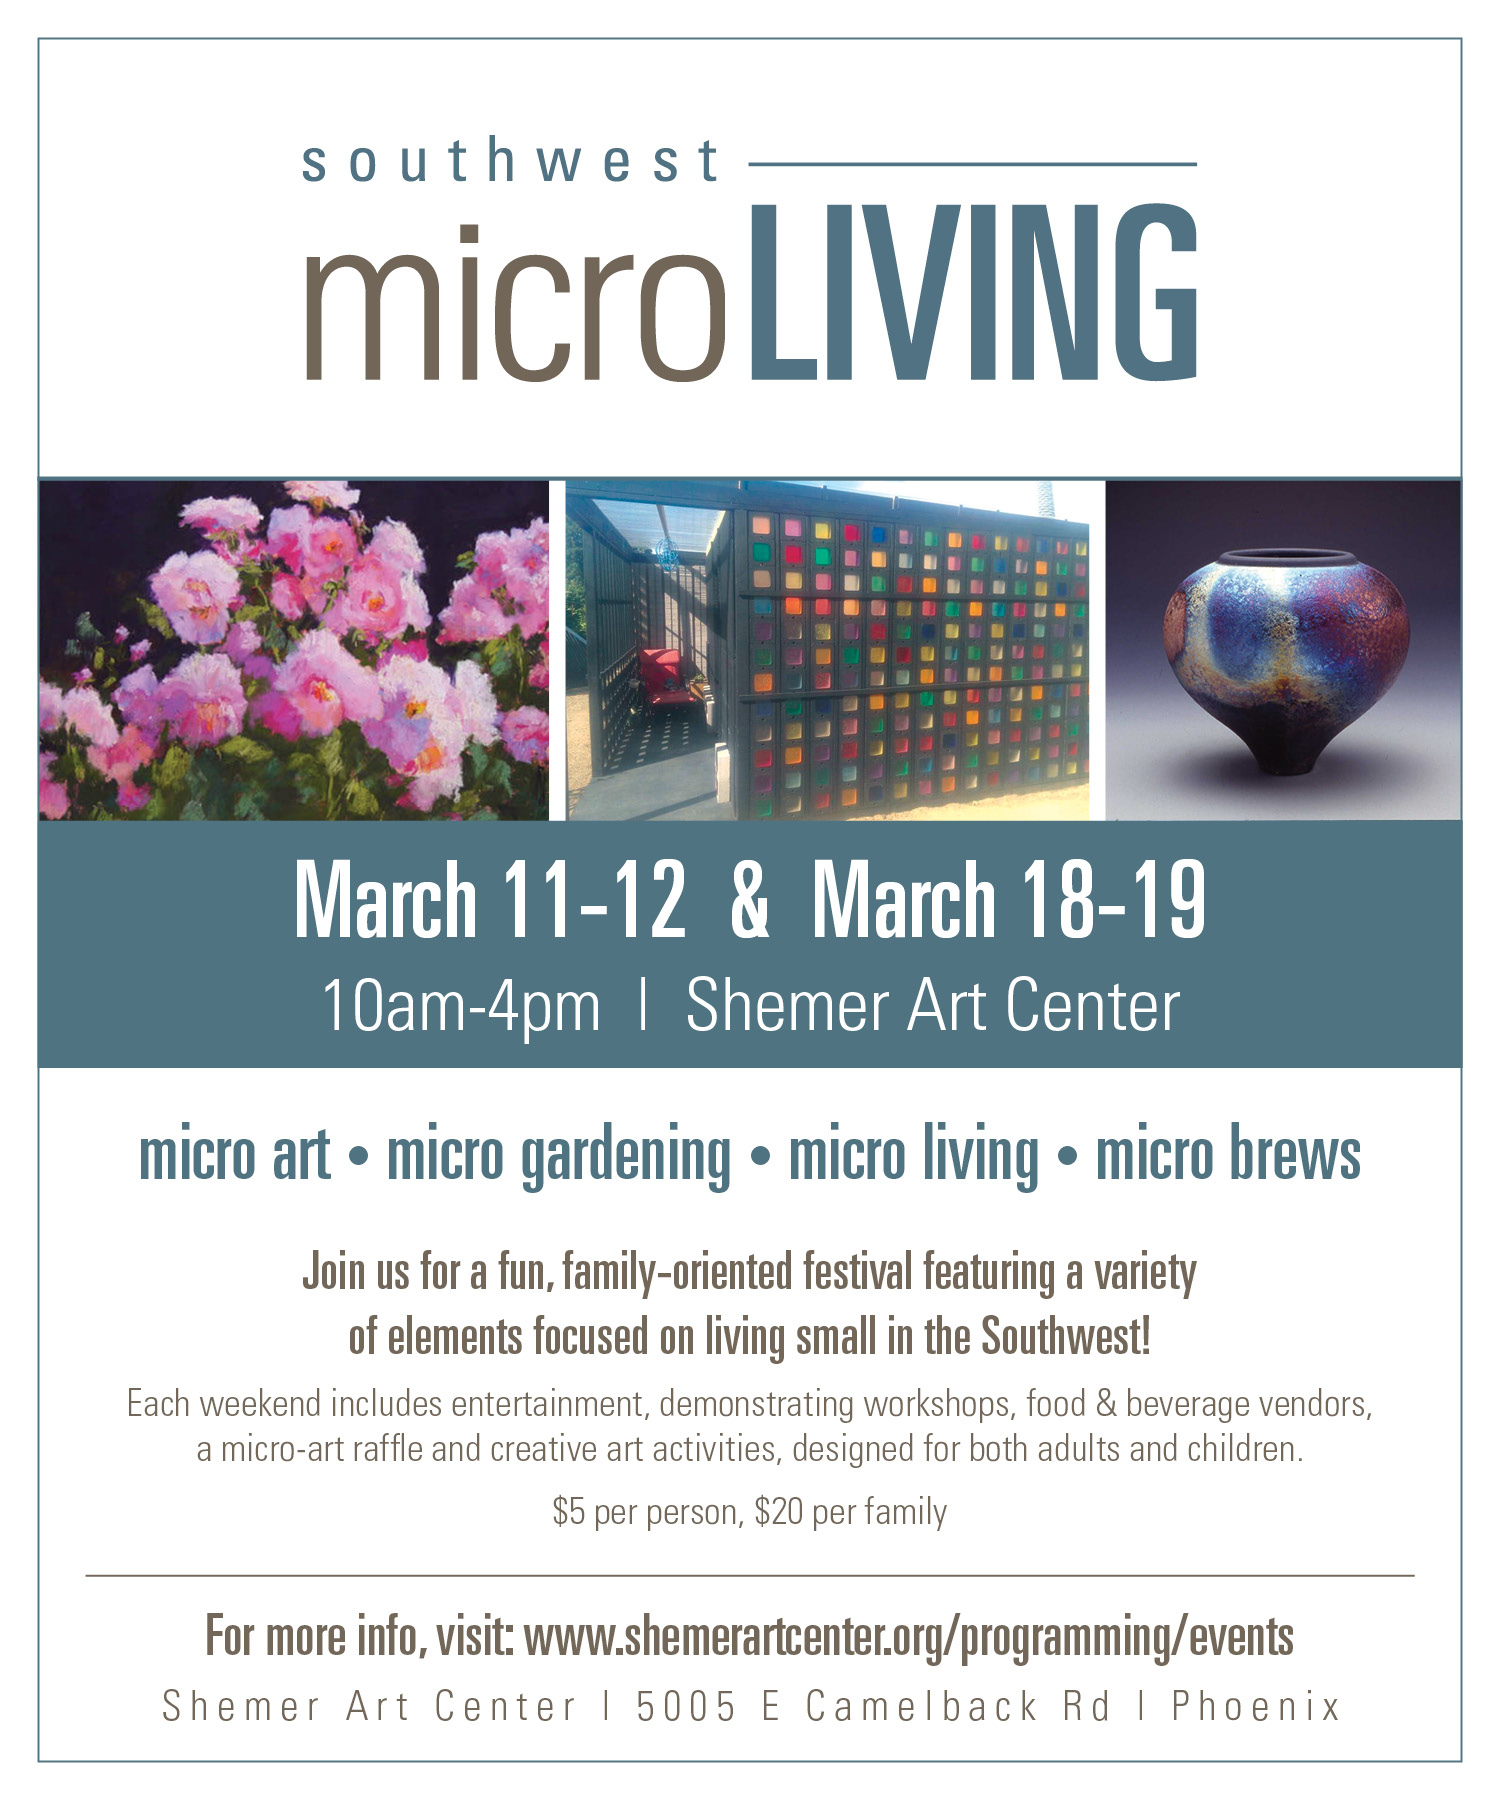 Southwest Micro-Living Event Planned!